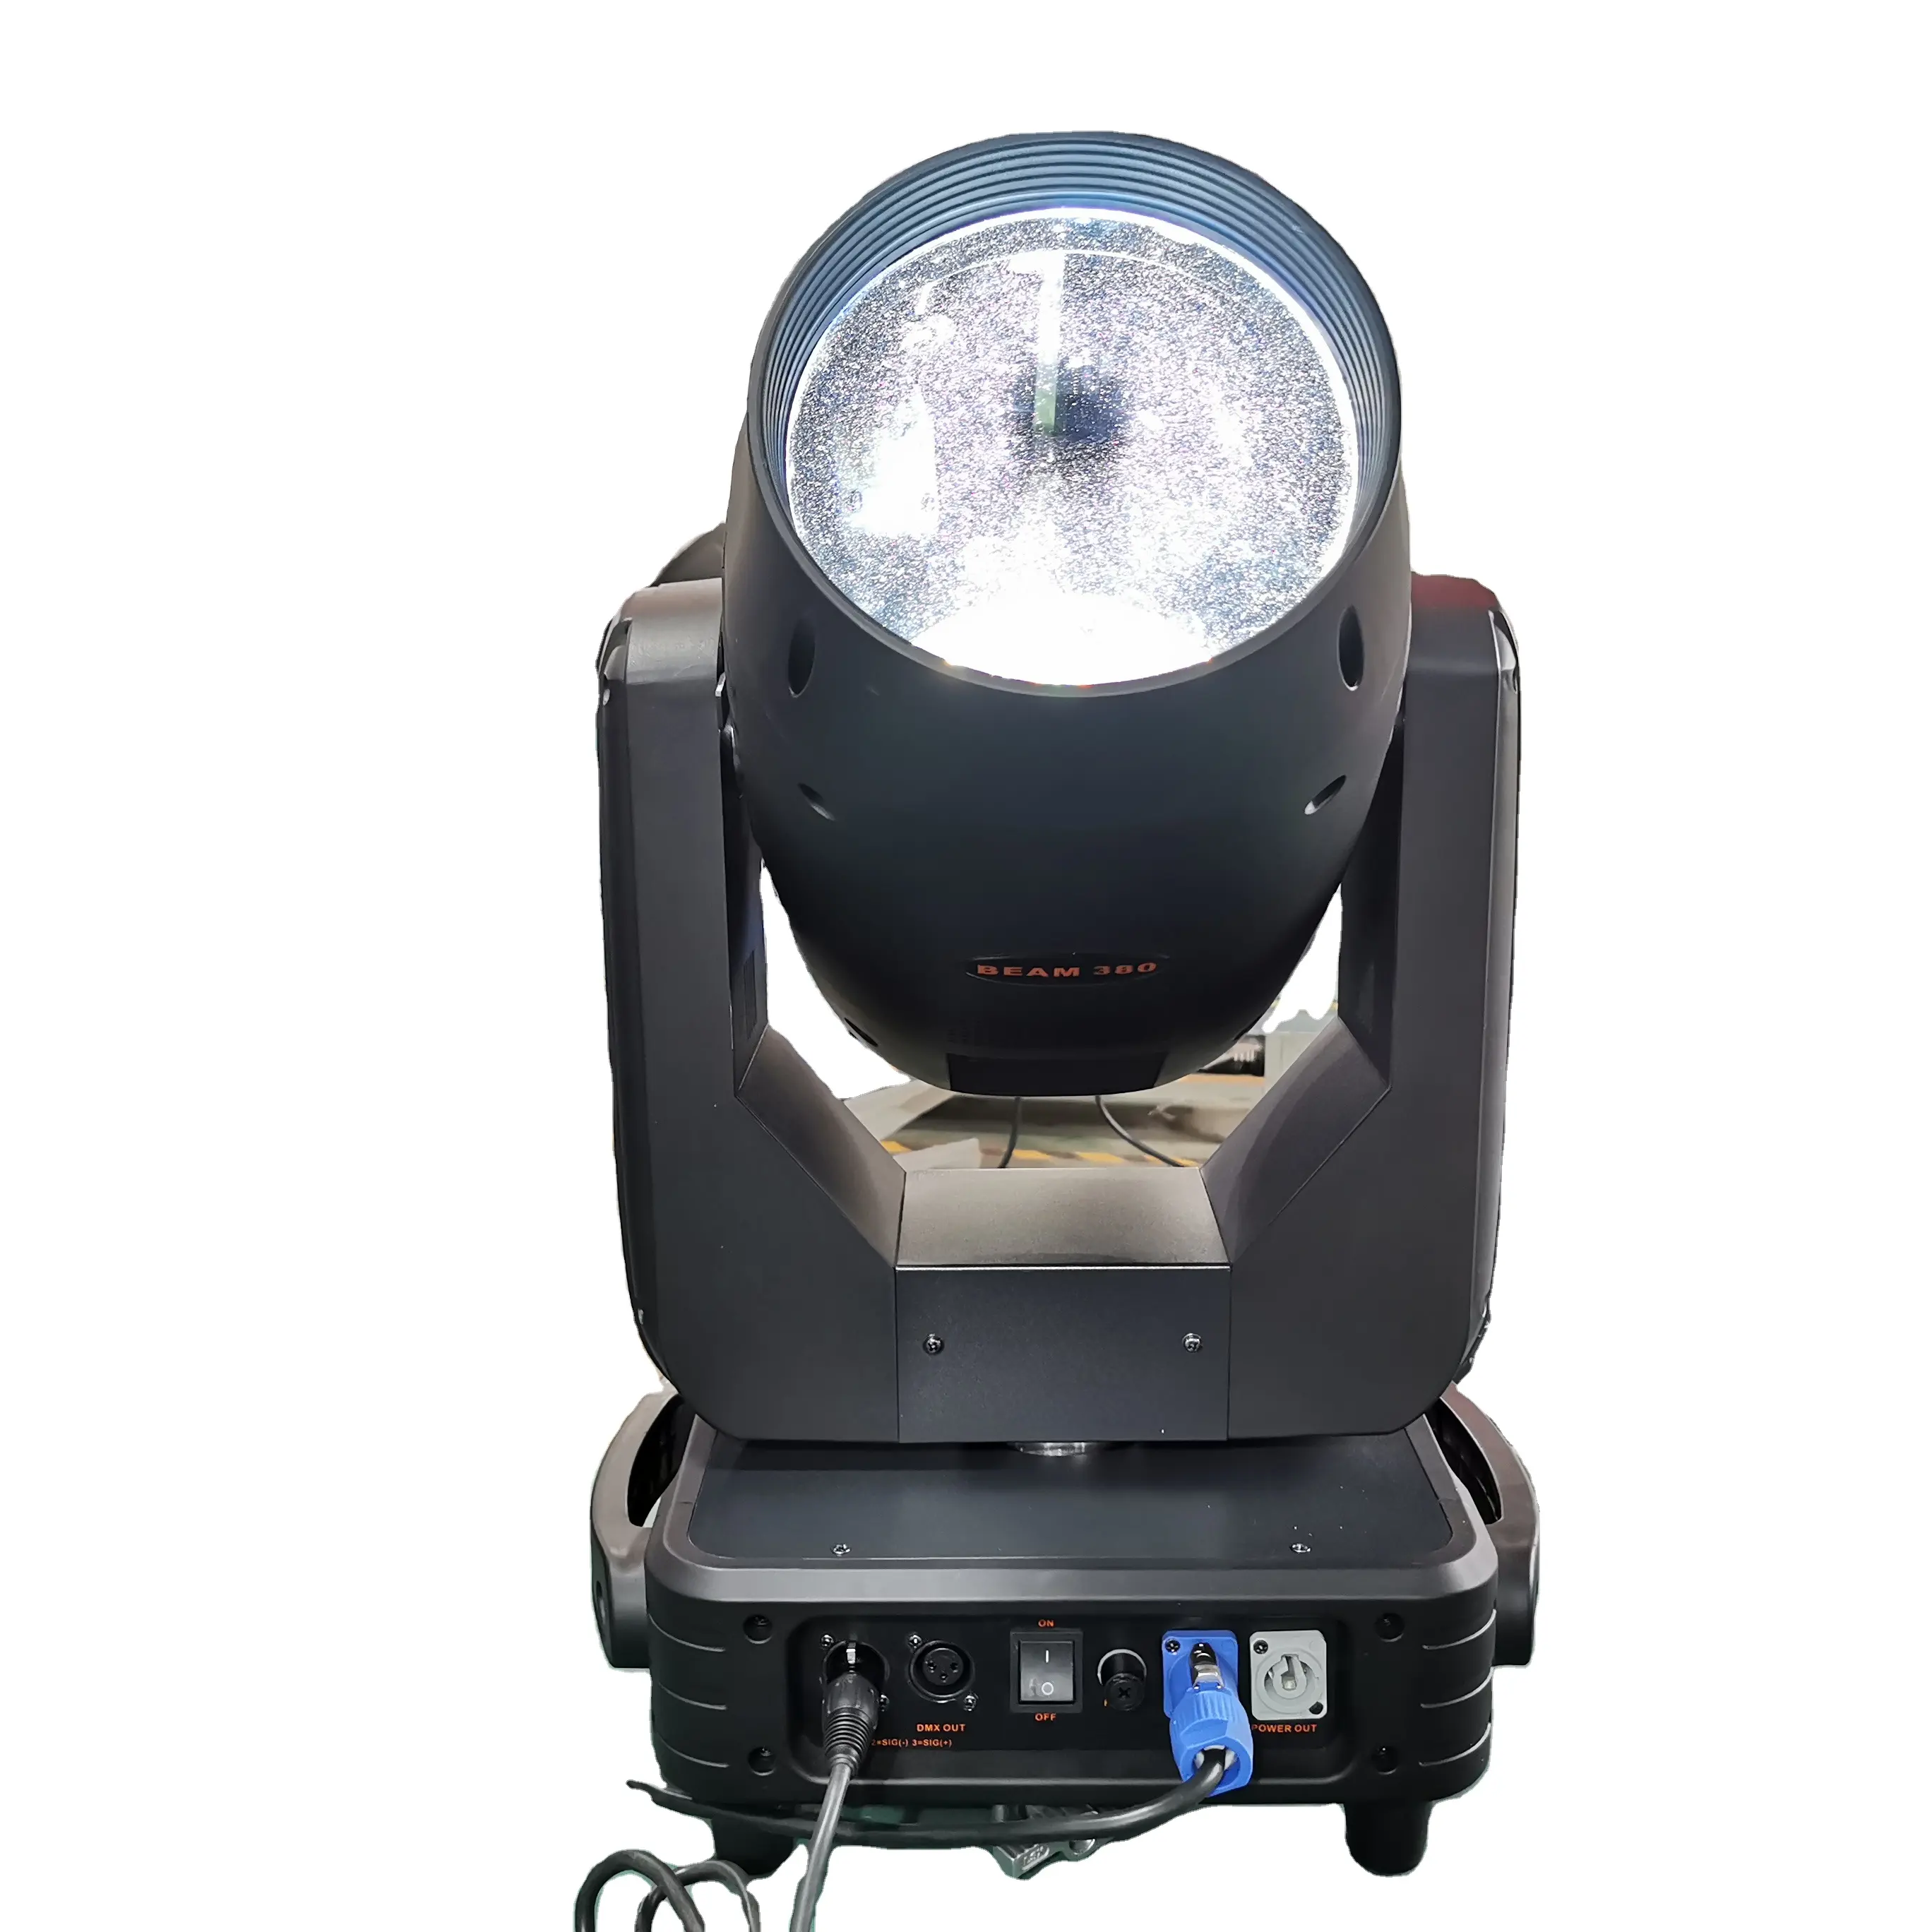 super power stage lighting Changeable Emitting Color 18r beam 380 moving head light